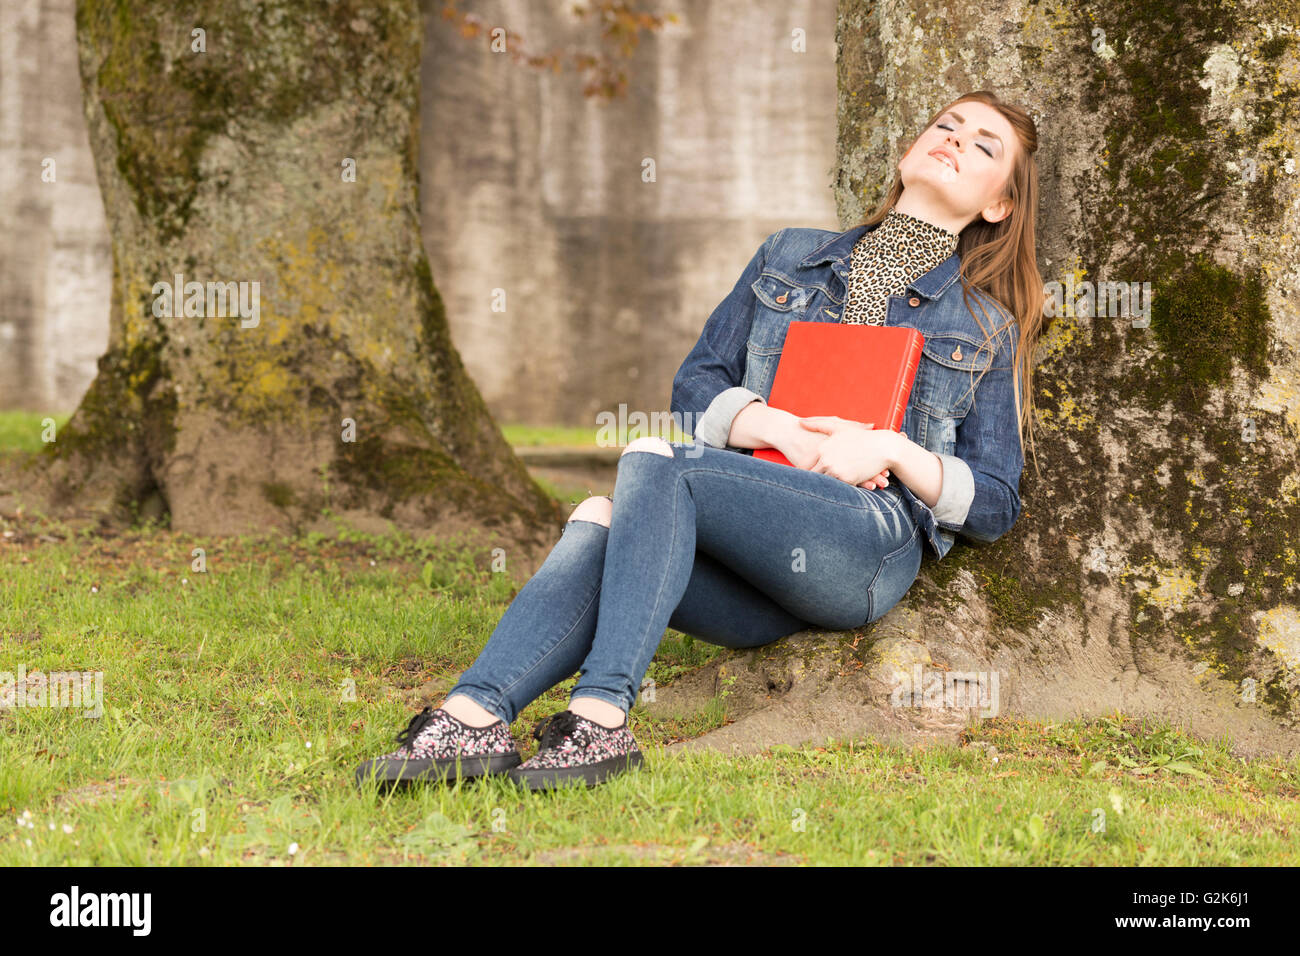 A young brown haired woman in blue jeans sitting in a park and reading a big red book. Stock Photo